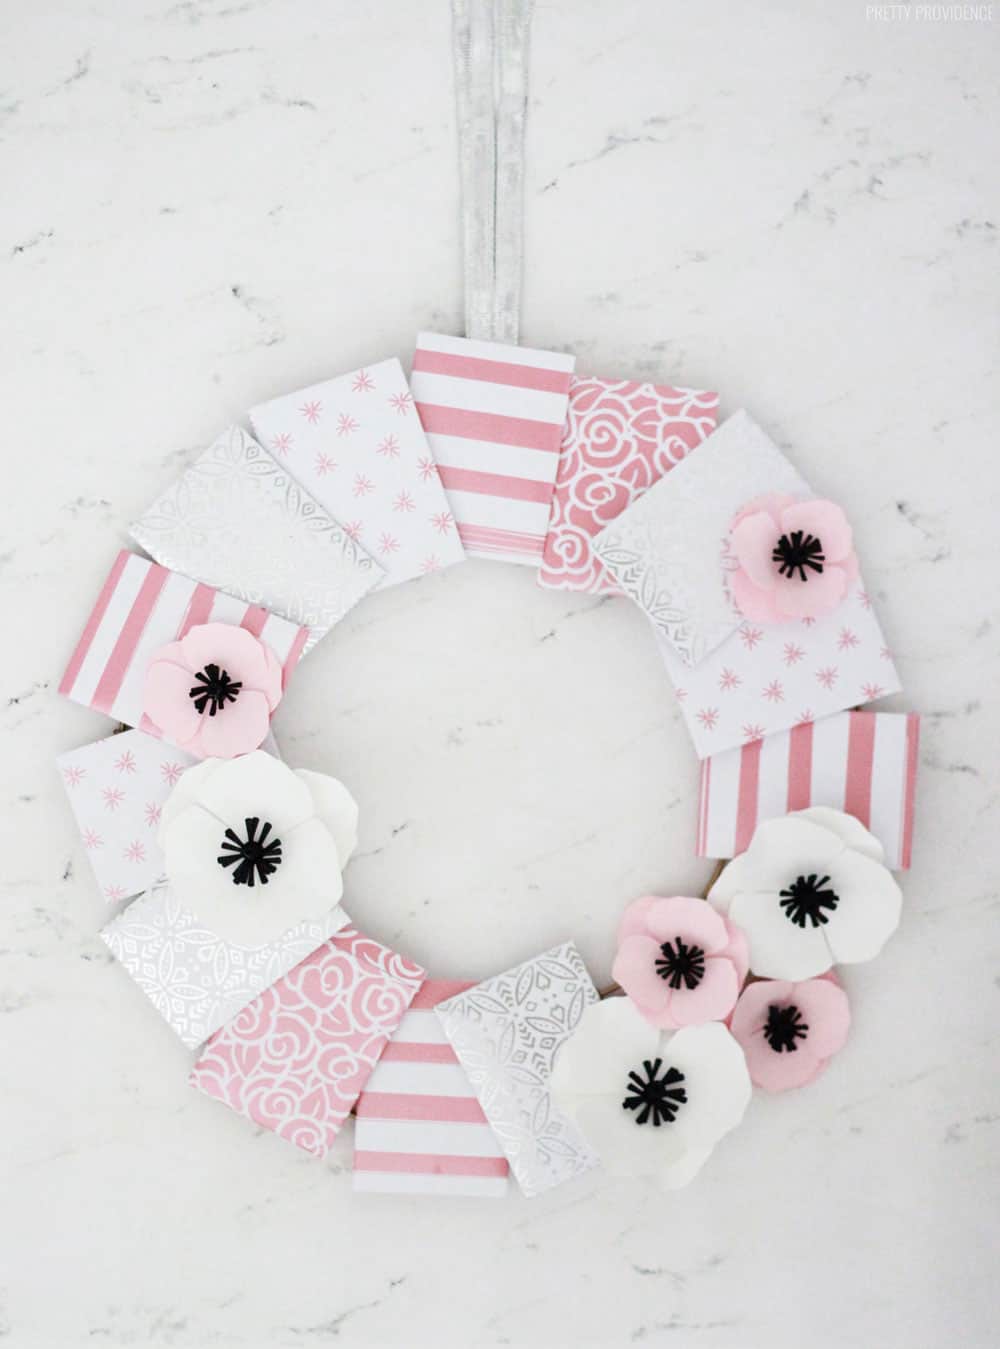 Creative Ways to Gift Gift Cards - Gift Card Wreath! 